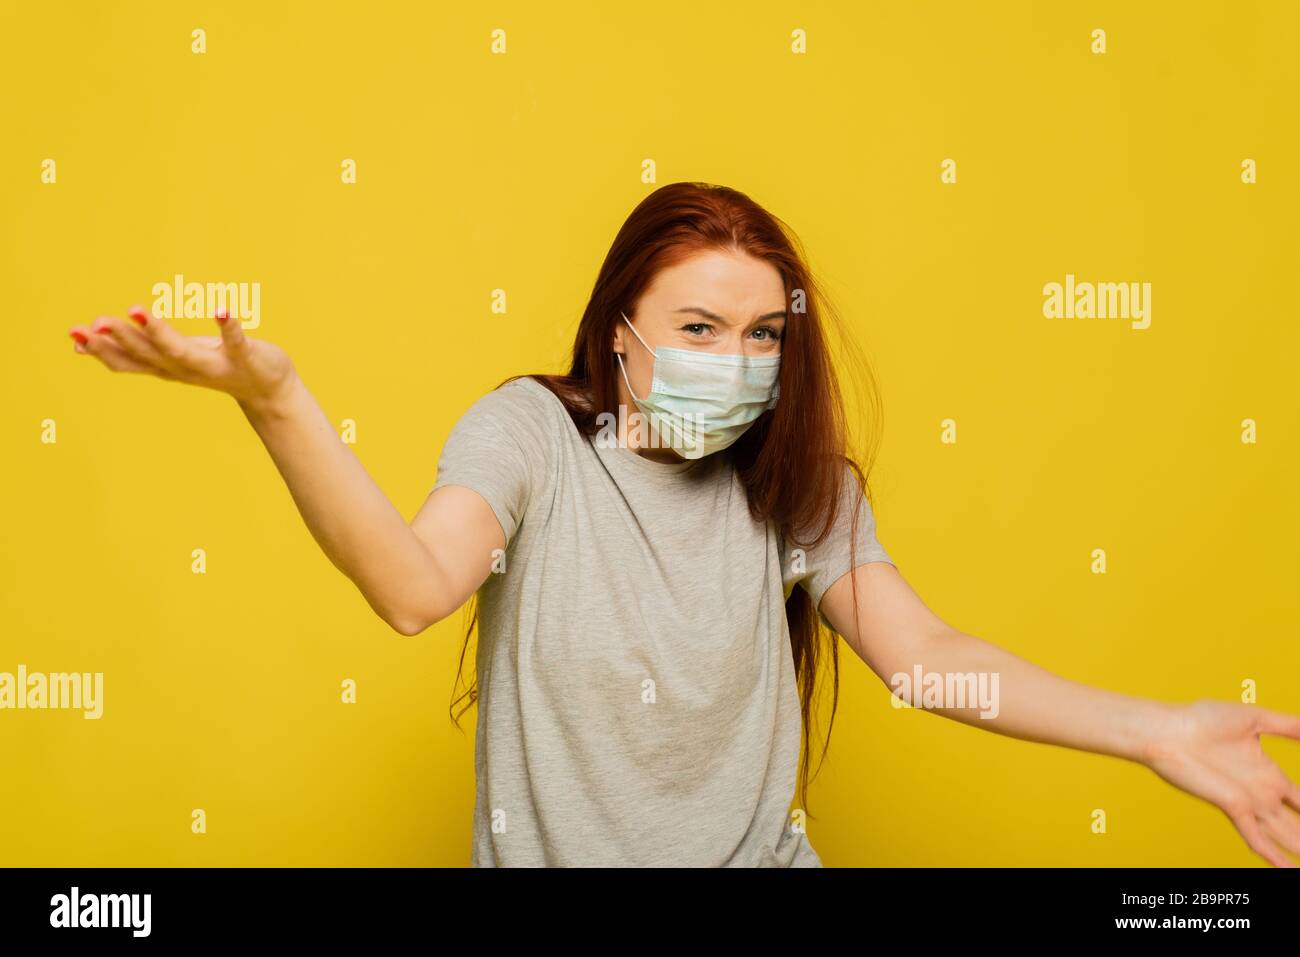 Beautiful caucasian young woman in gray t-shirt with disposable face mask. Protection versus viruses and infectious. Studio portrait, concept with yellow background. Shocked woman waving her arms. Stock Photo